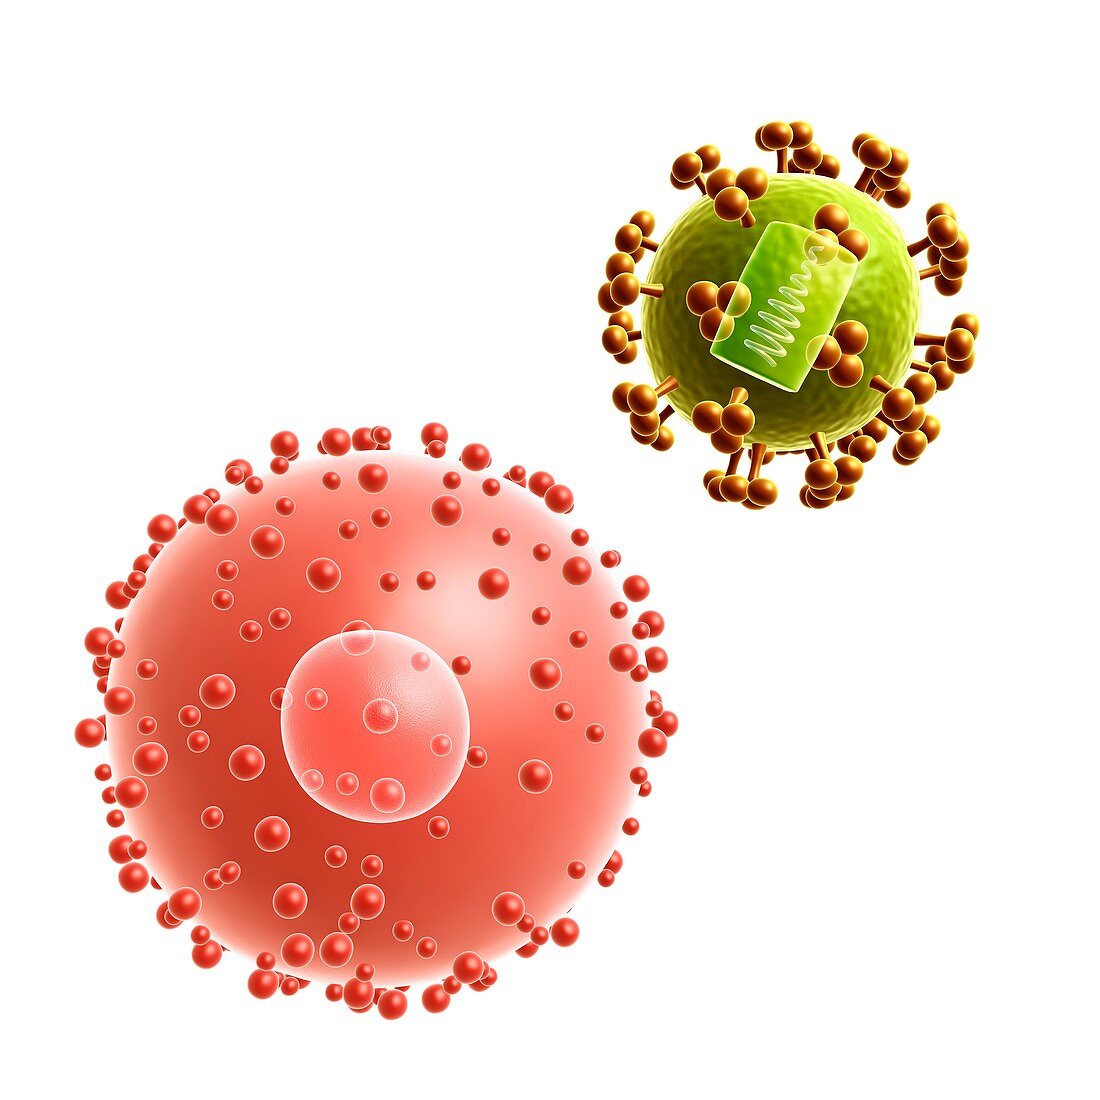 HIV virus infecting a cell,illustration